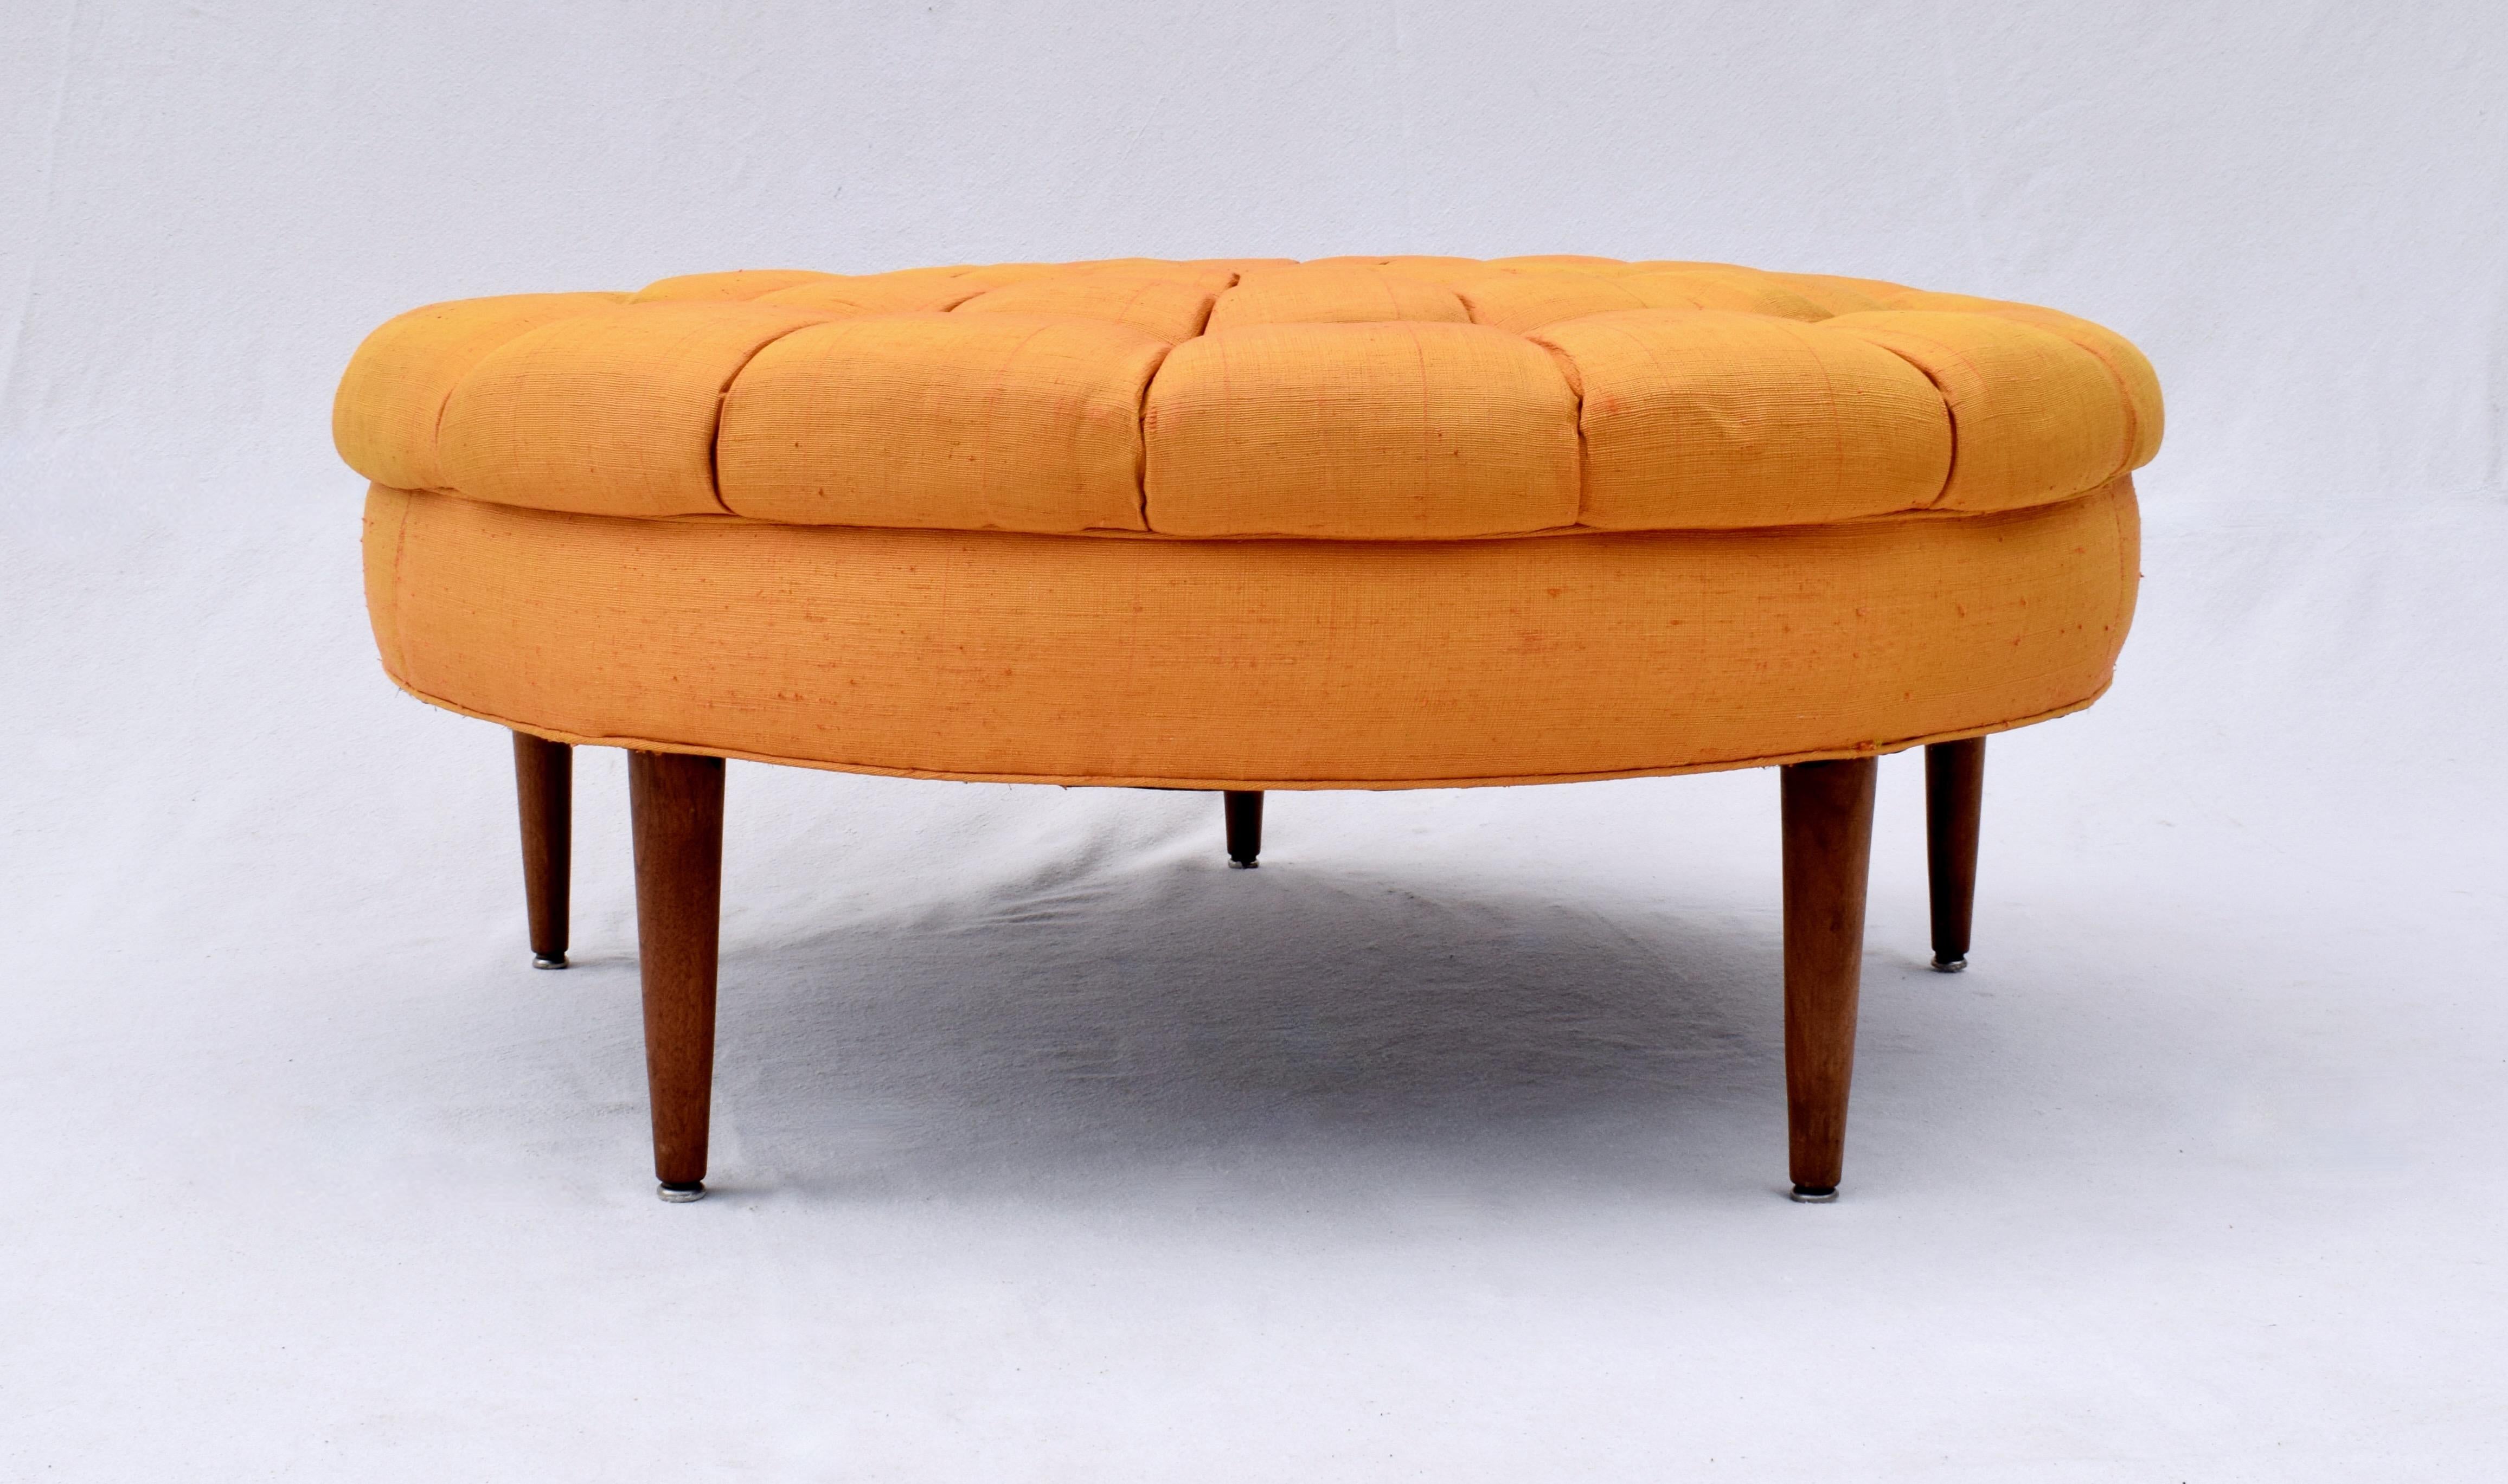 An unusual custom Mid-Century Modern tufted ottoman in vibrant Sunflower raw silk upholstery with Walnut tapered legs. Fully reinforced with new webbing from the underside to maintain the integrity of the outstanding tufts & seat; otherwise all